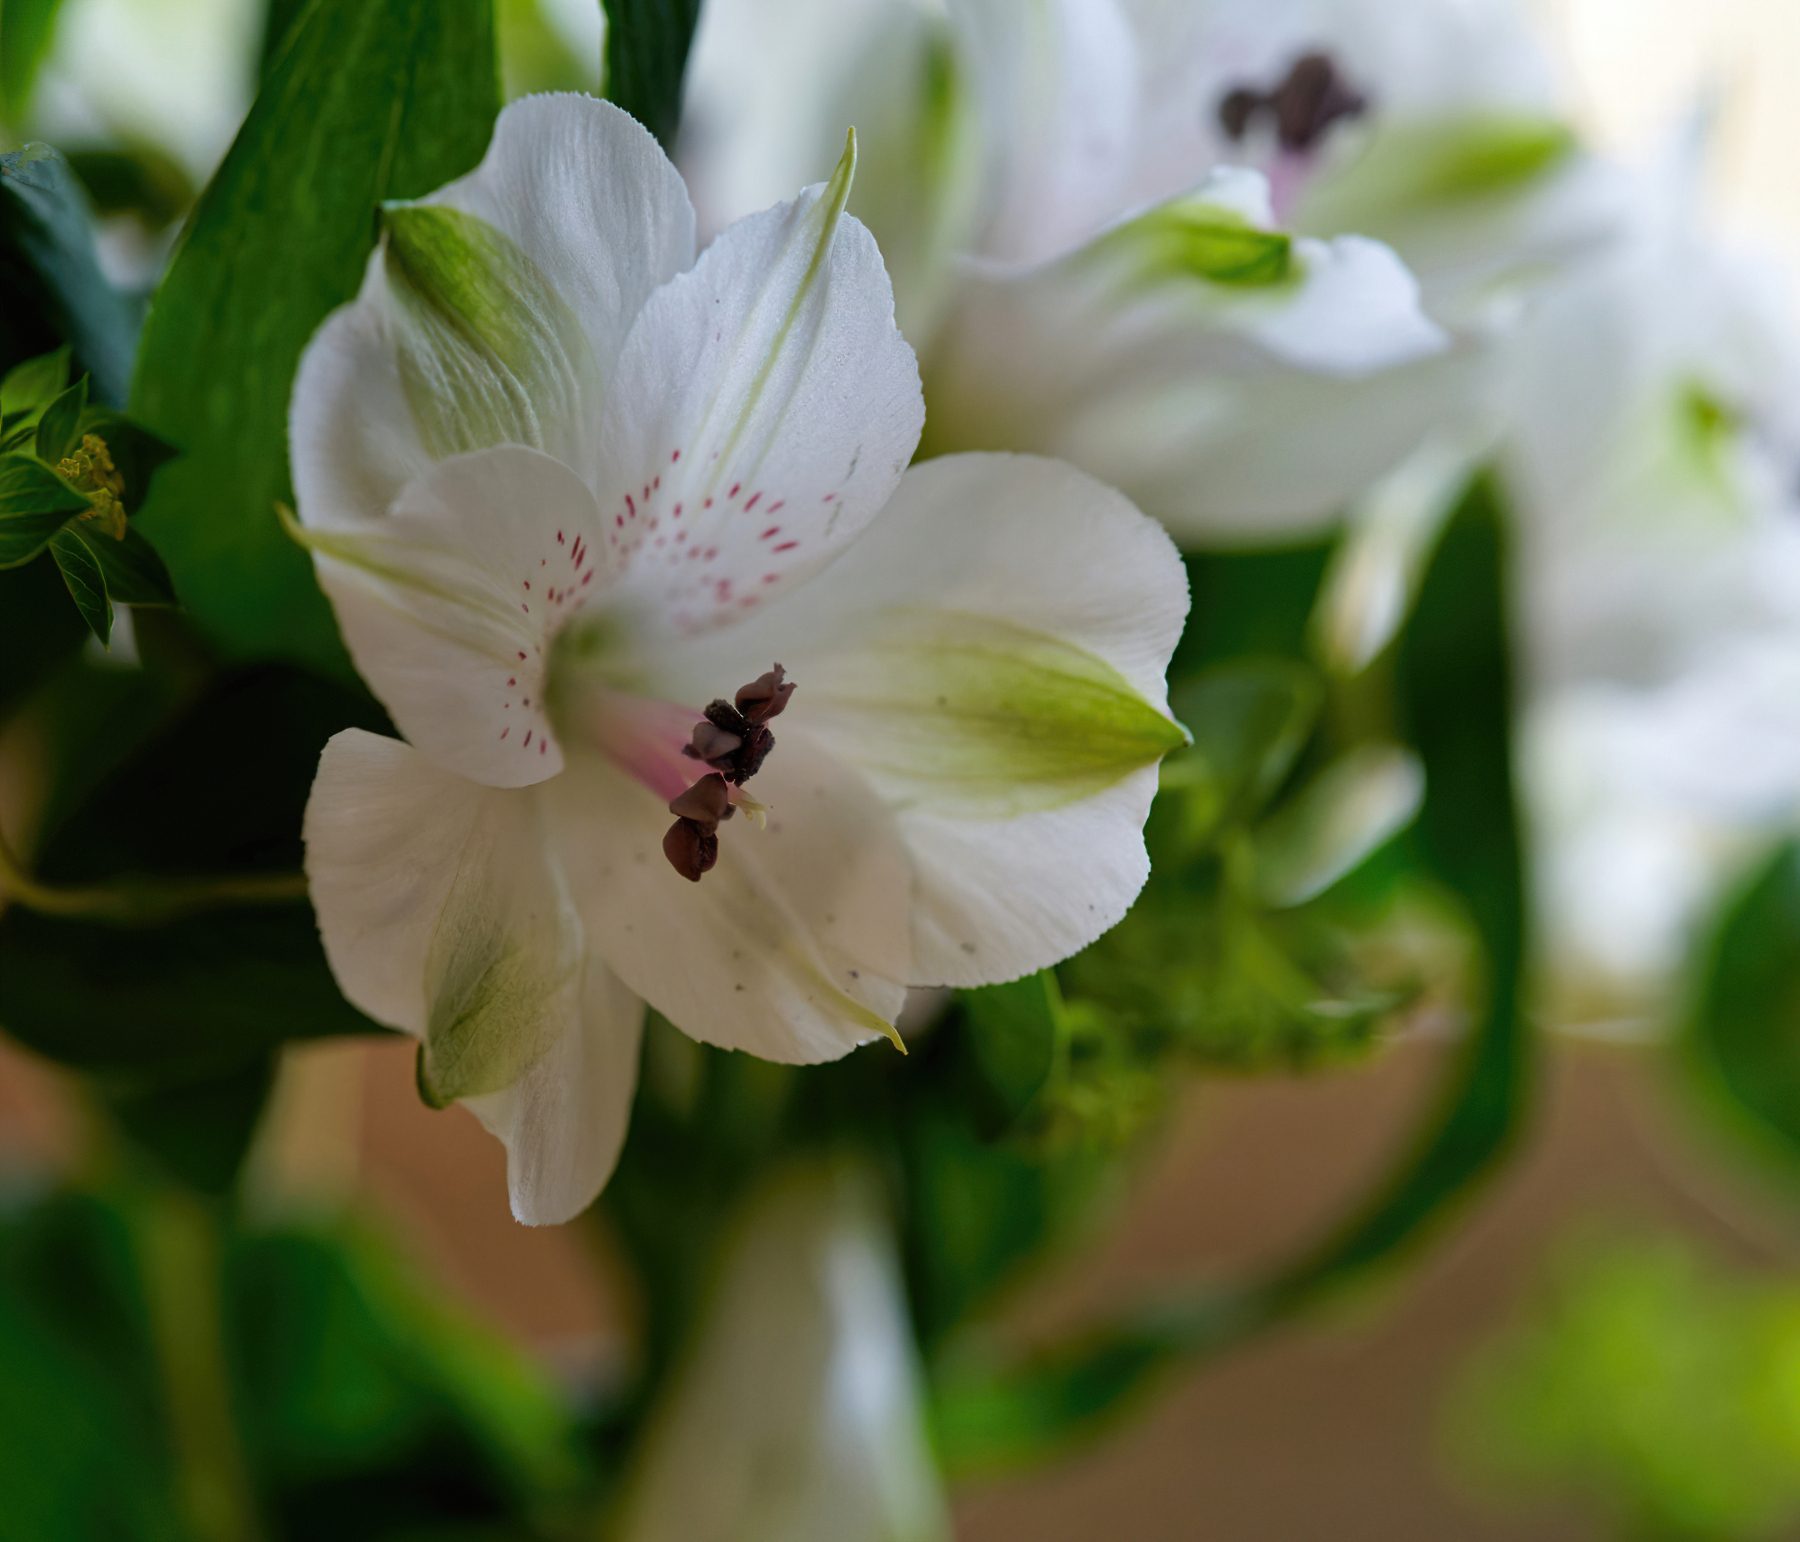 White Flower With Pink Accents .jpg